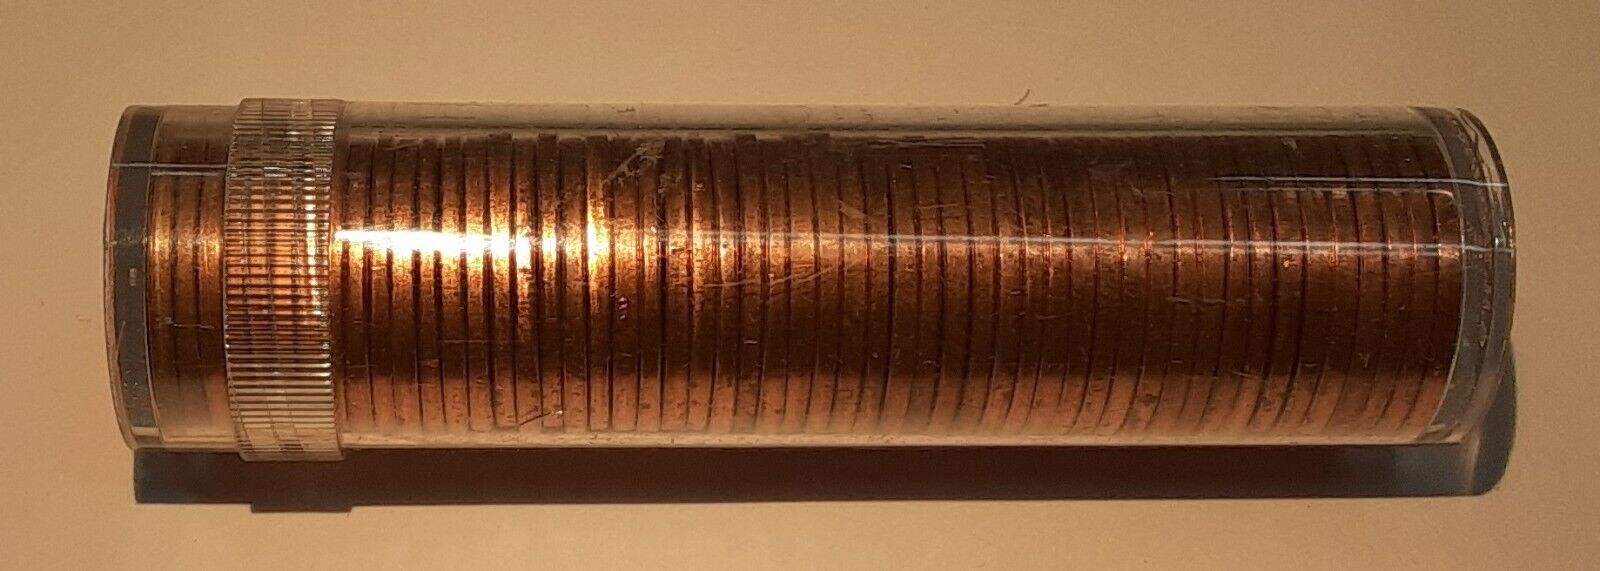 1966 United States Roll Of BU Lincoln Cents - 50 Coins Total in Tubes